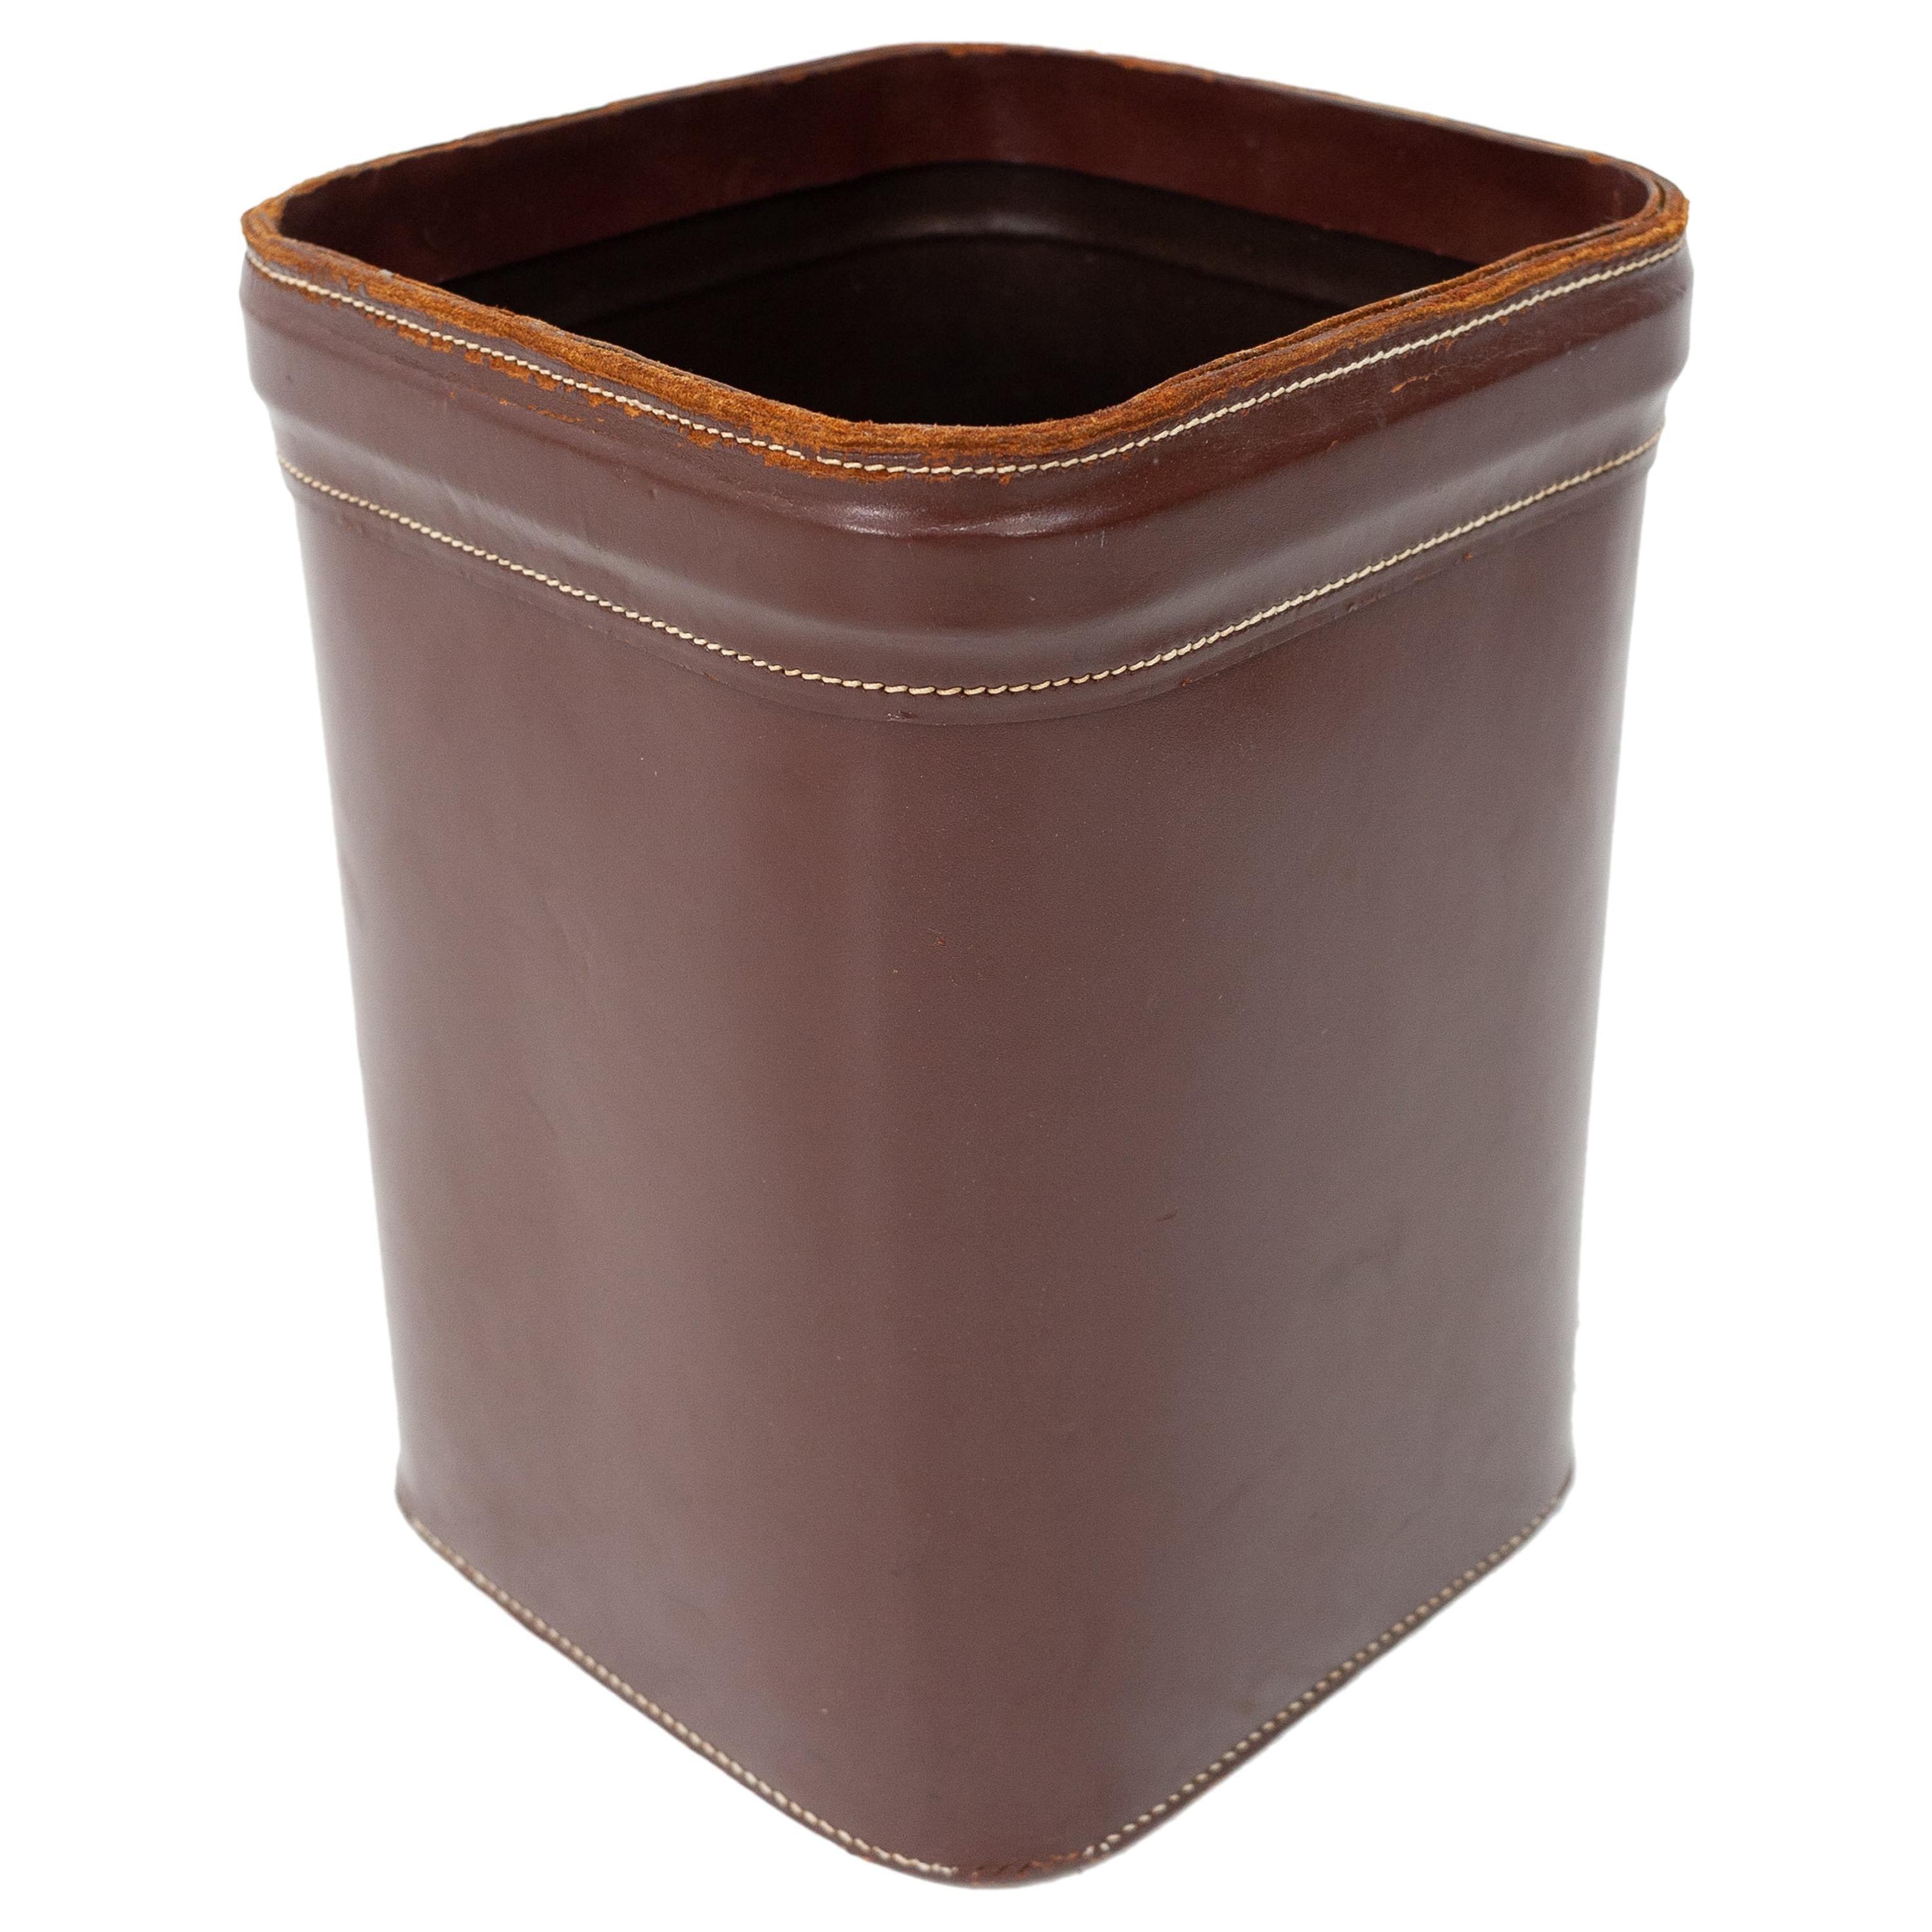 1960s French Stitched Leather Waste Basket